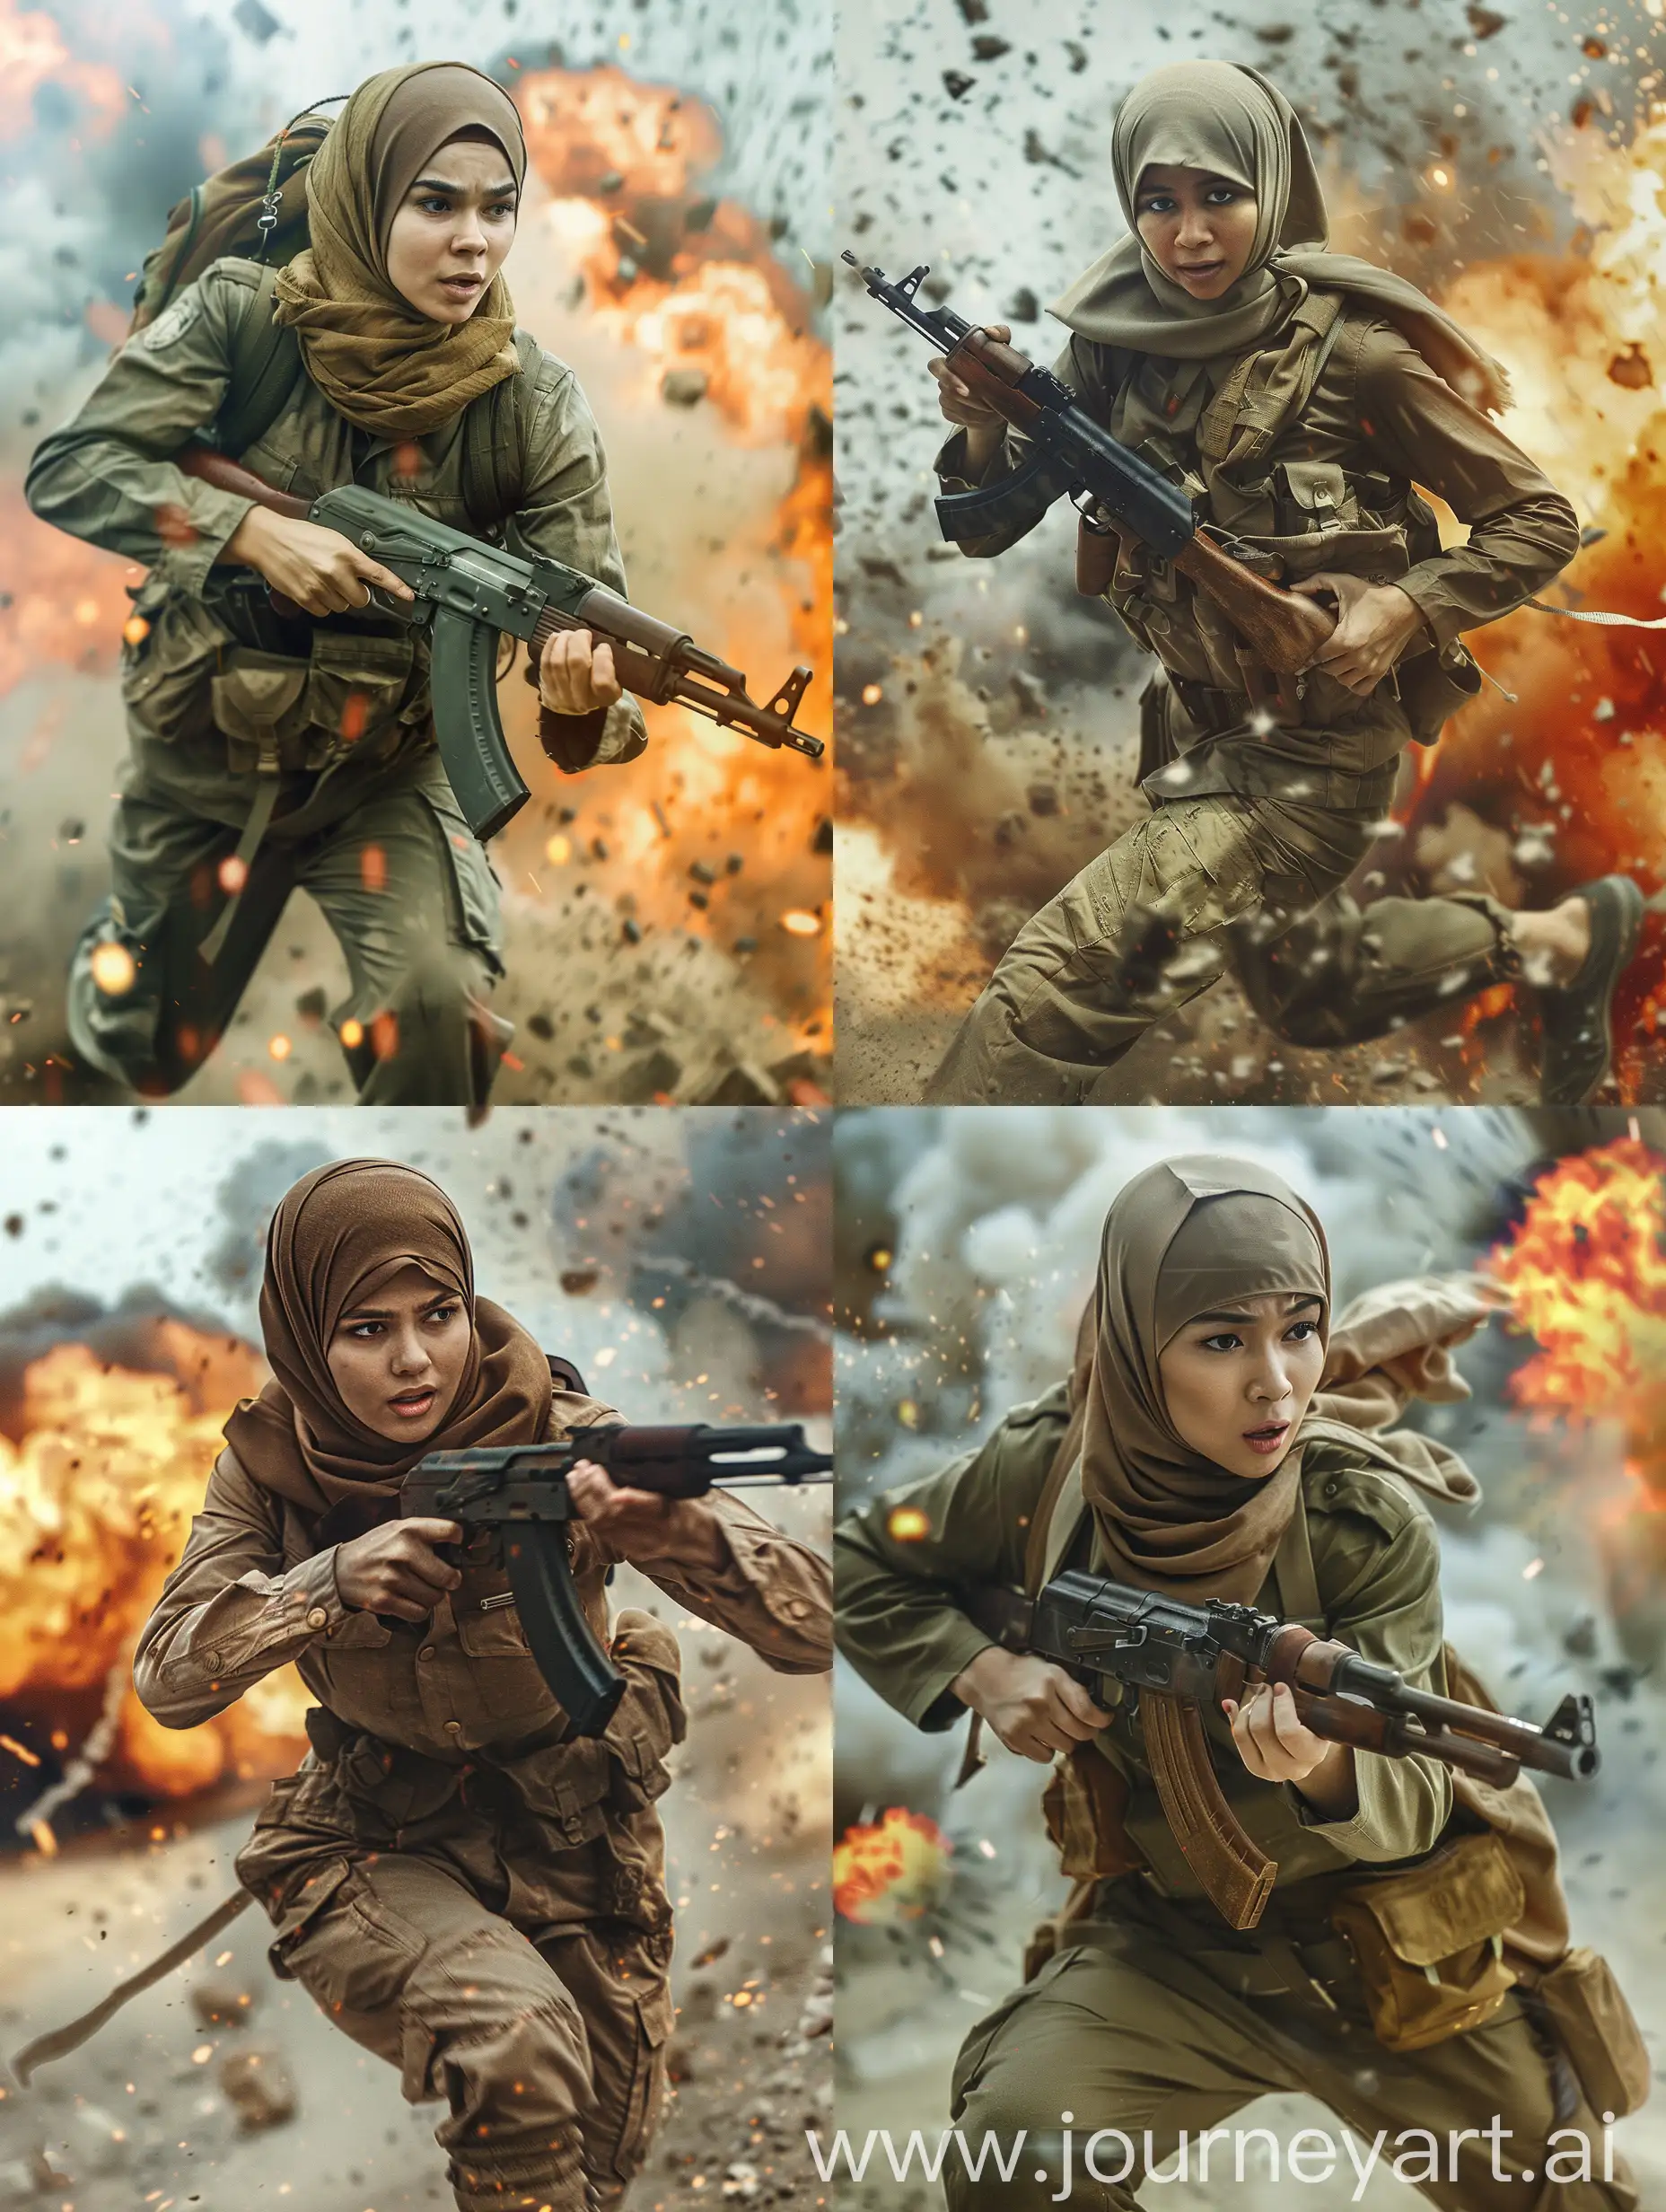 a beautiful hijab woman wearing a World War II soldier costume imitates human (soldier) movements. He holds an ak47 gun from the World War II era in his hand, a movie scene of running desperately on the battlefield, with explosions behind him.High quality. 8K HD.